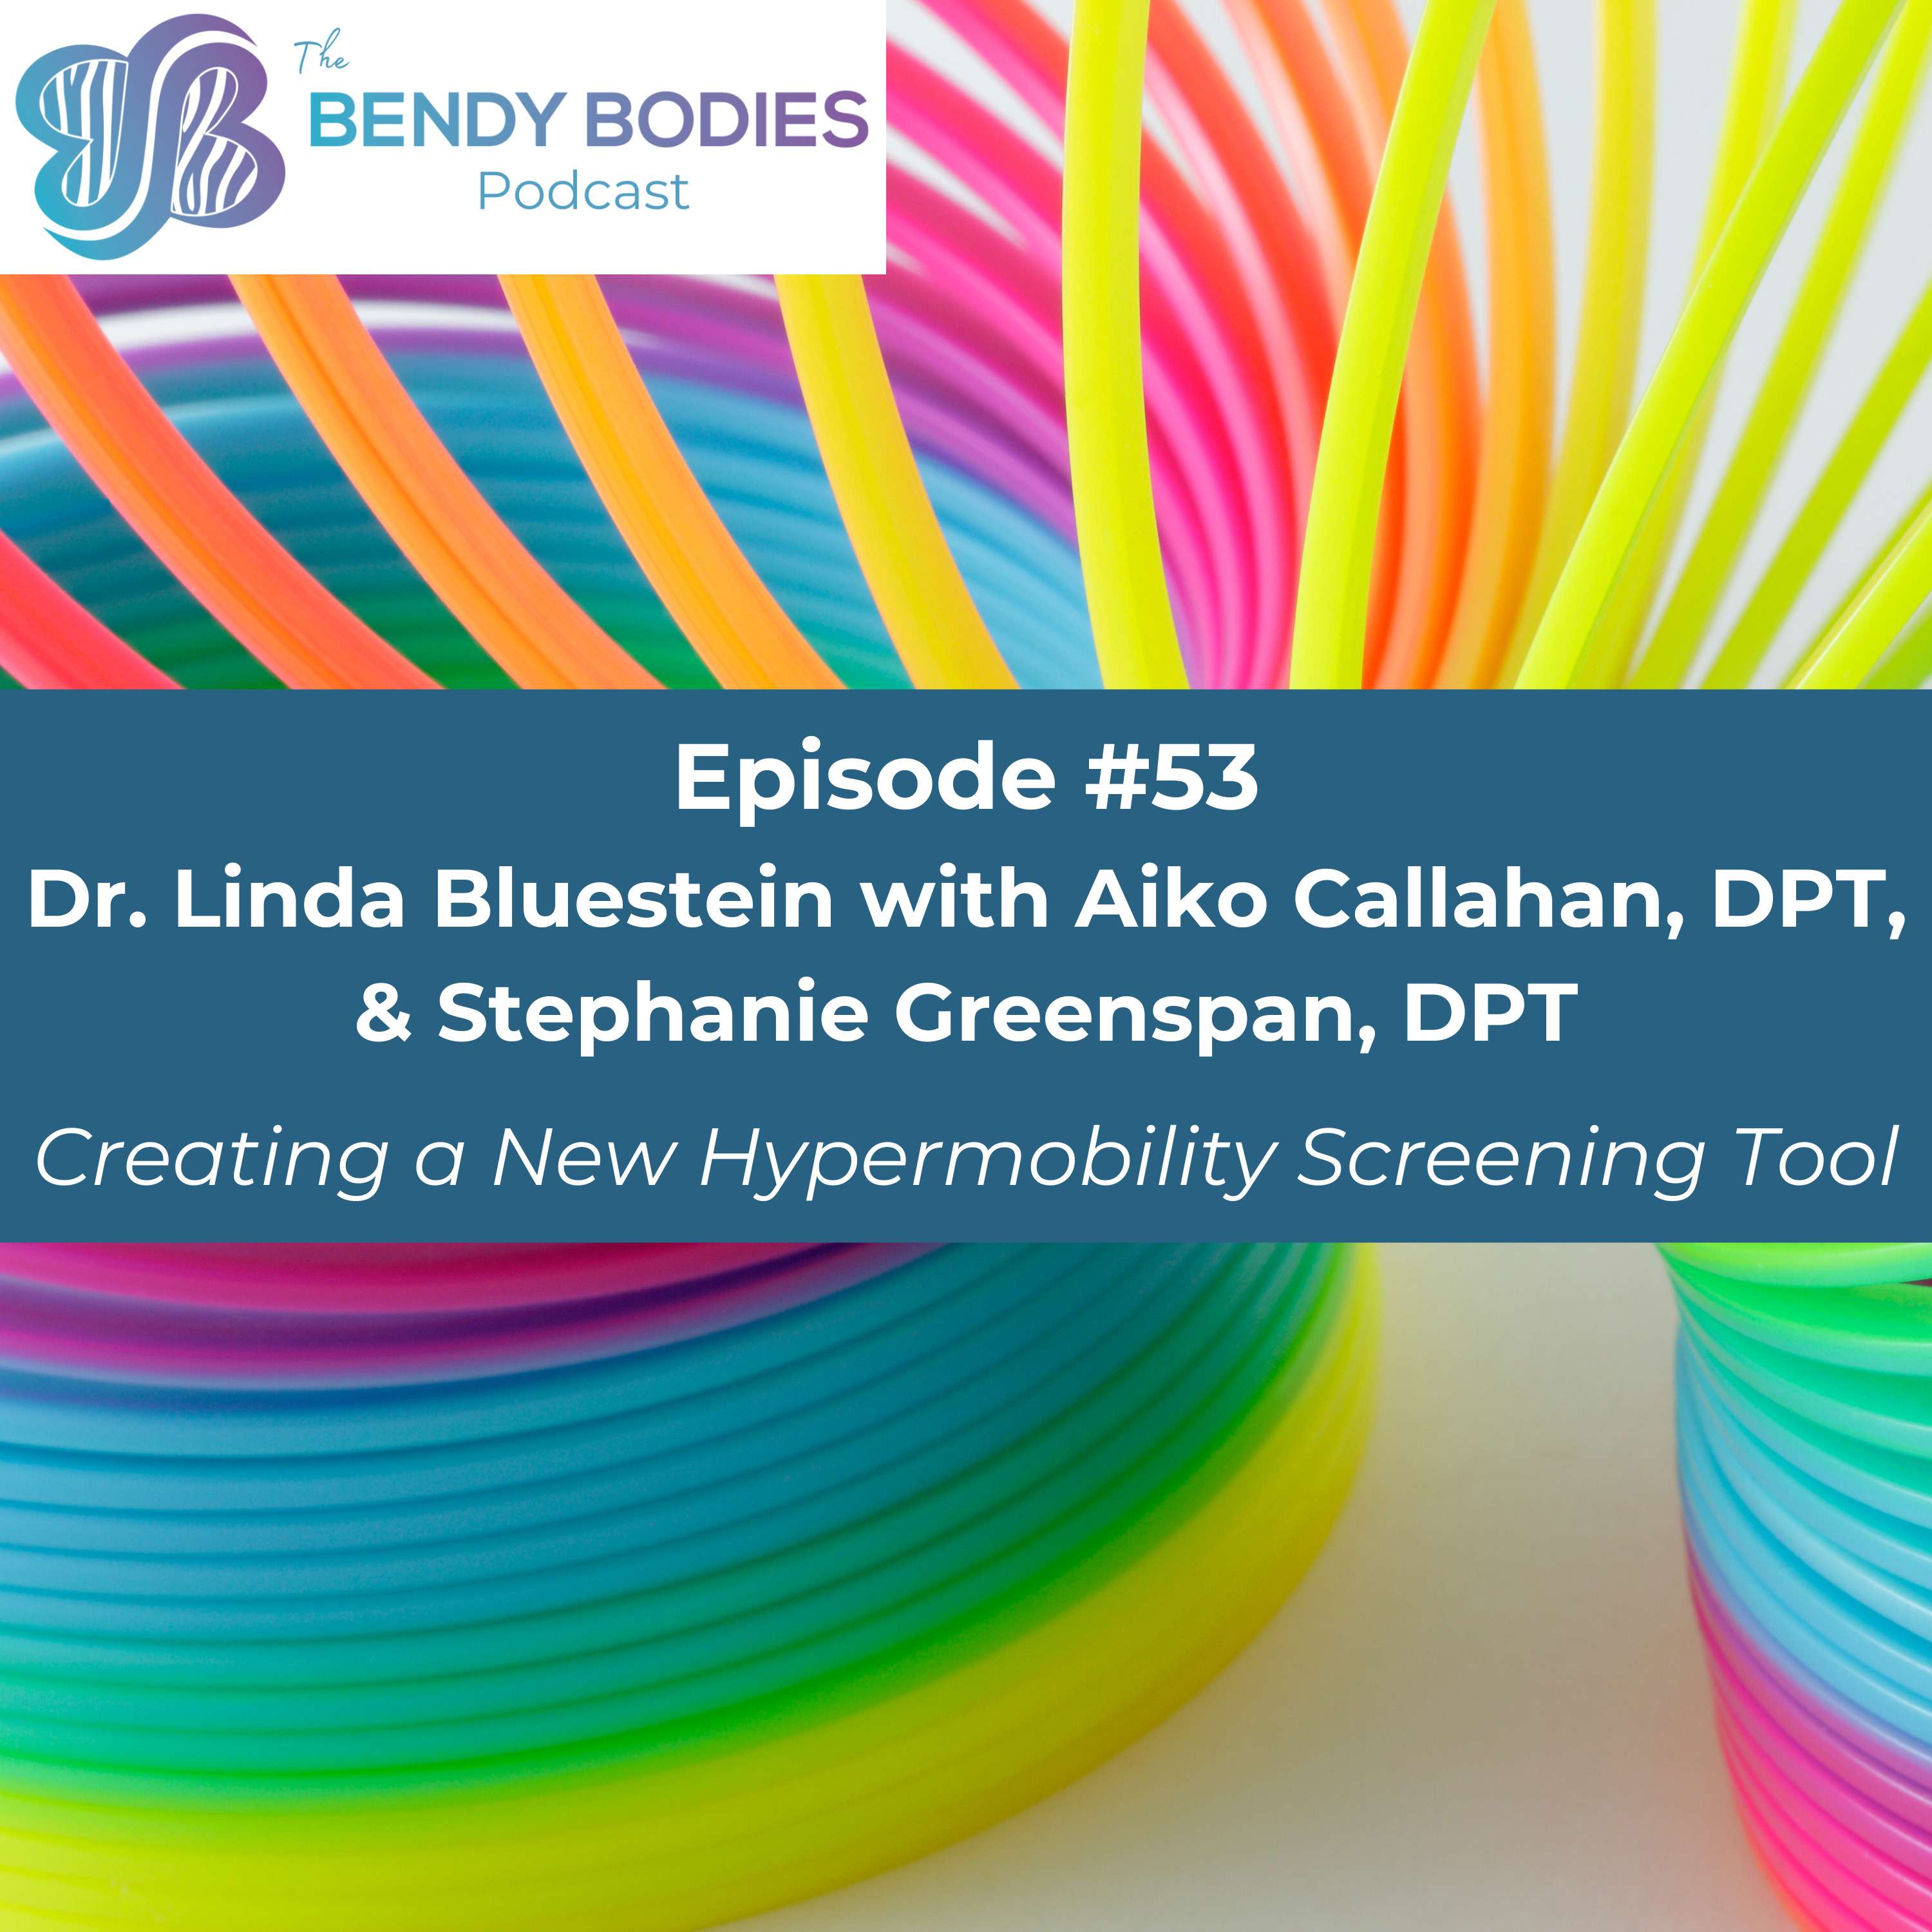 53. Creating a New Hypermobility Screening Tool with Aiko Callahan, DPT, and Stephanie Greenspan, DPT